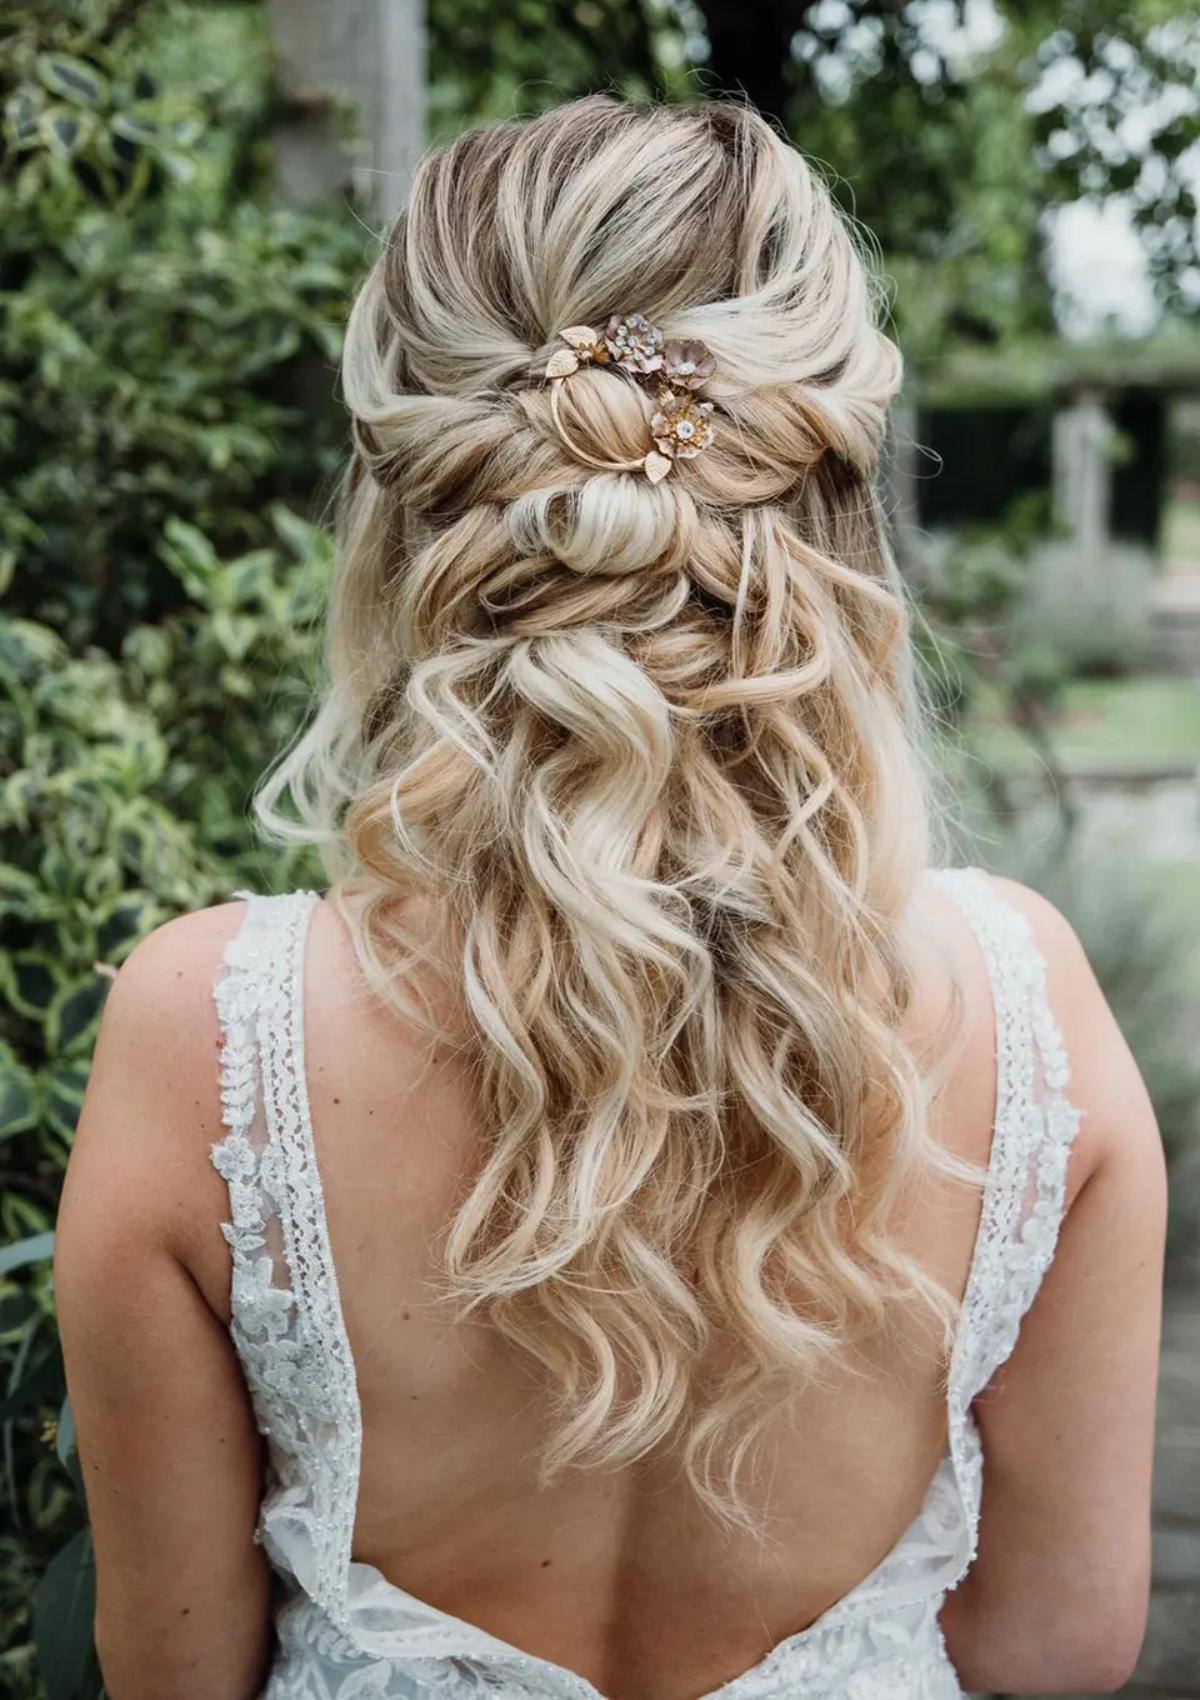 Trending Bridal Hairstyles in 2018 - FashionForRoyals